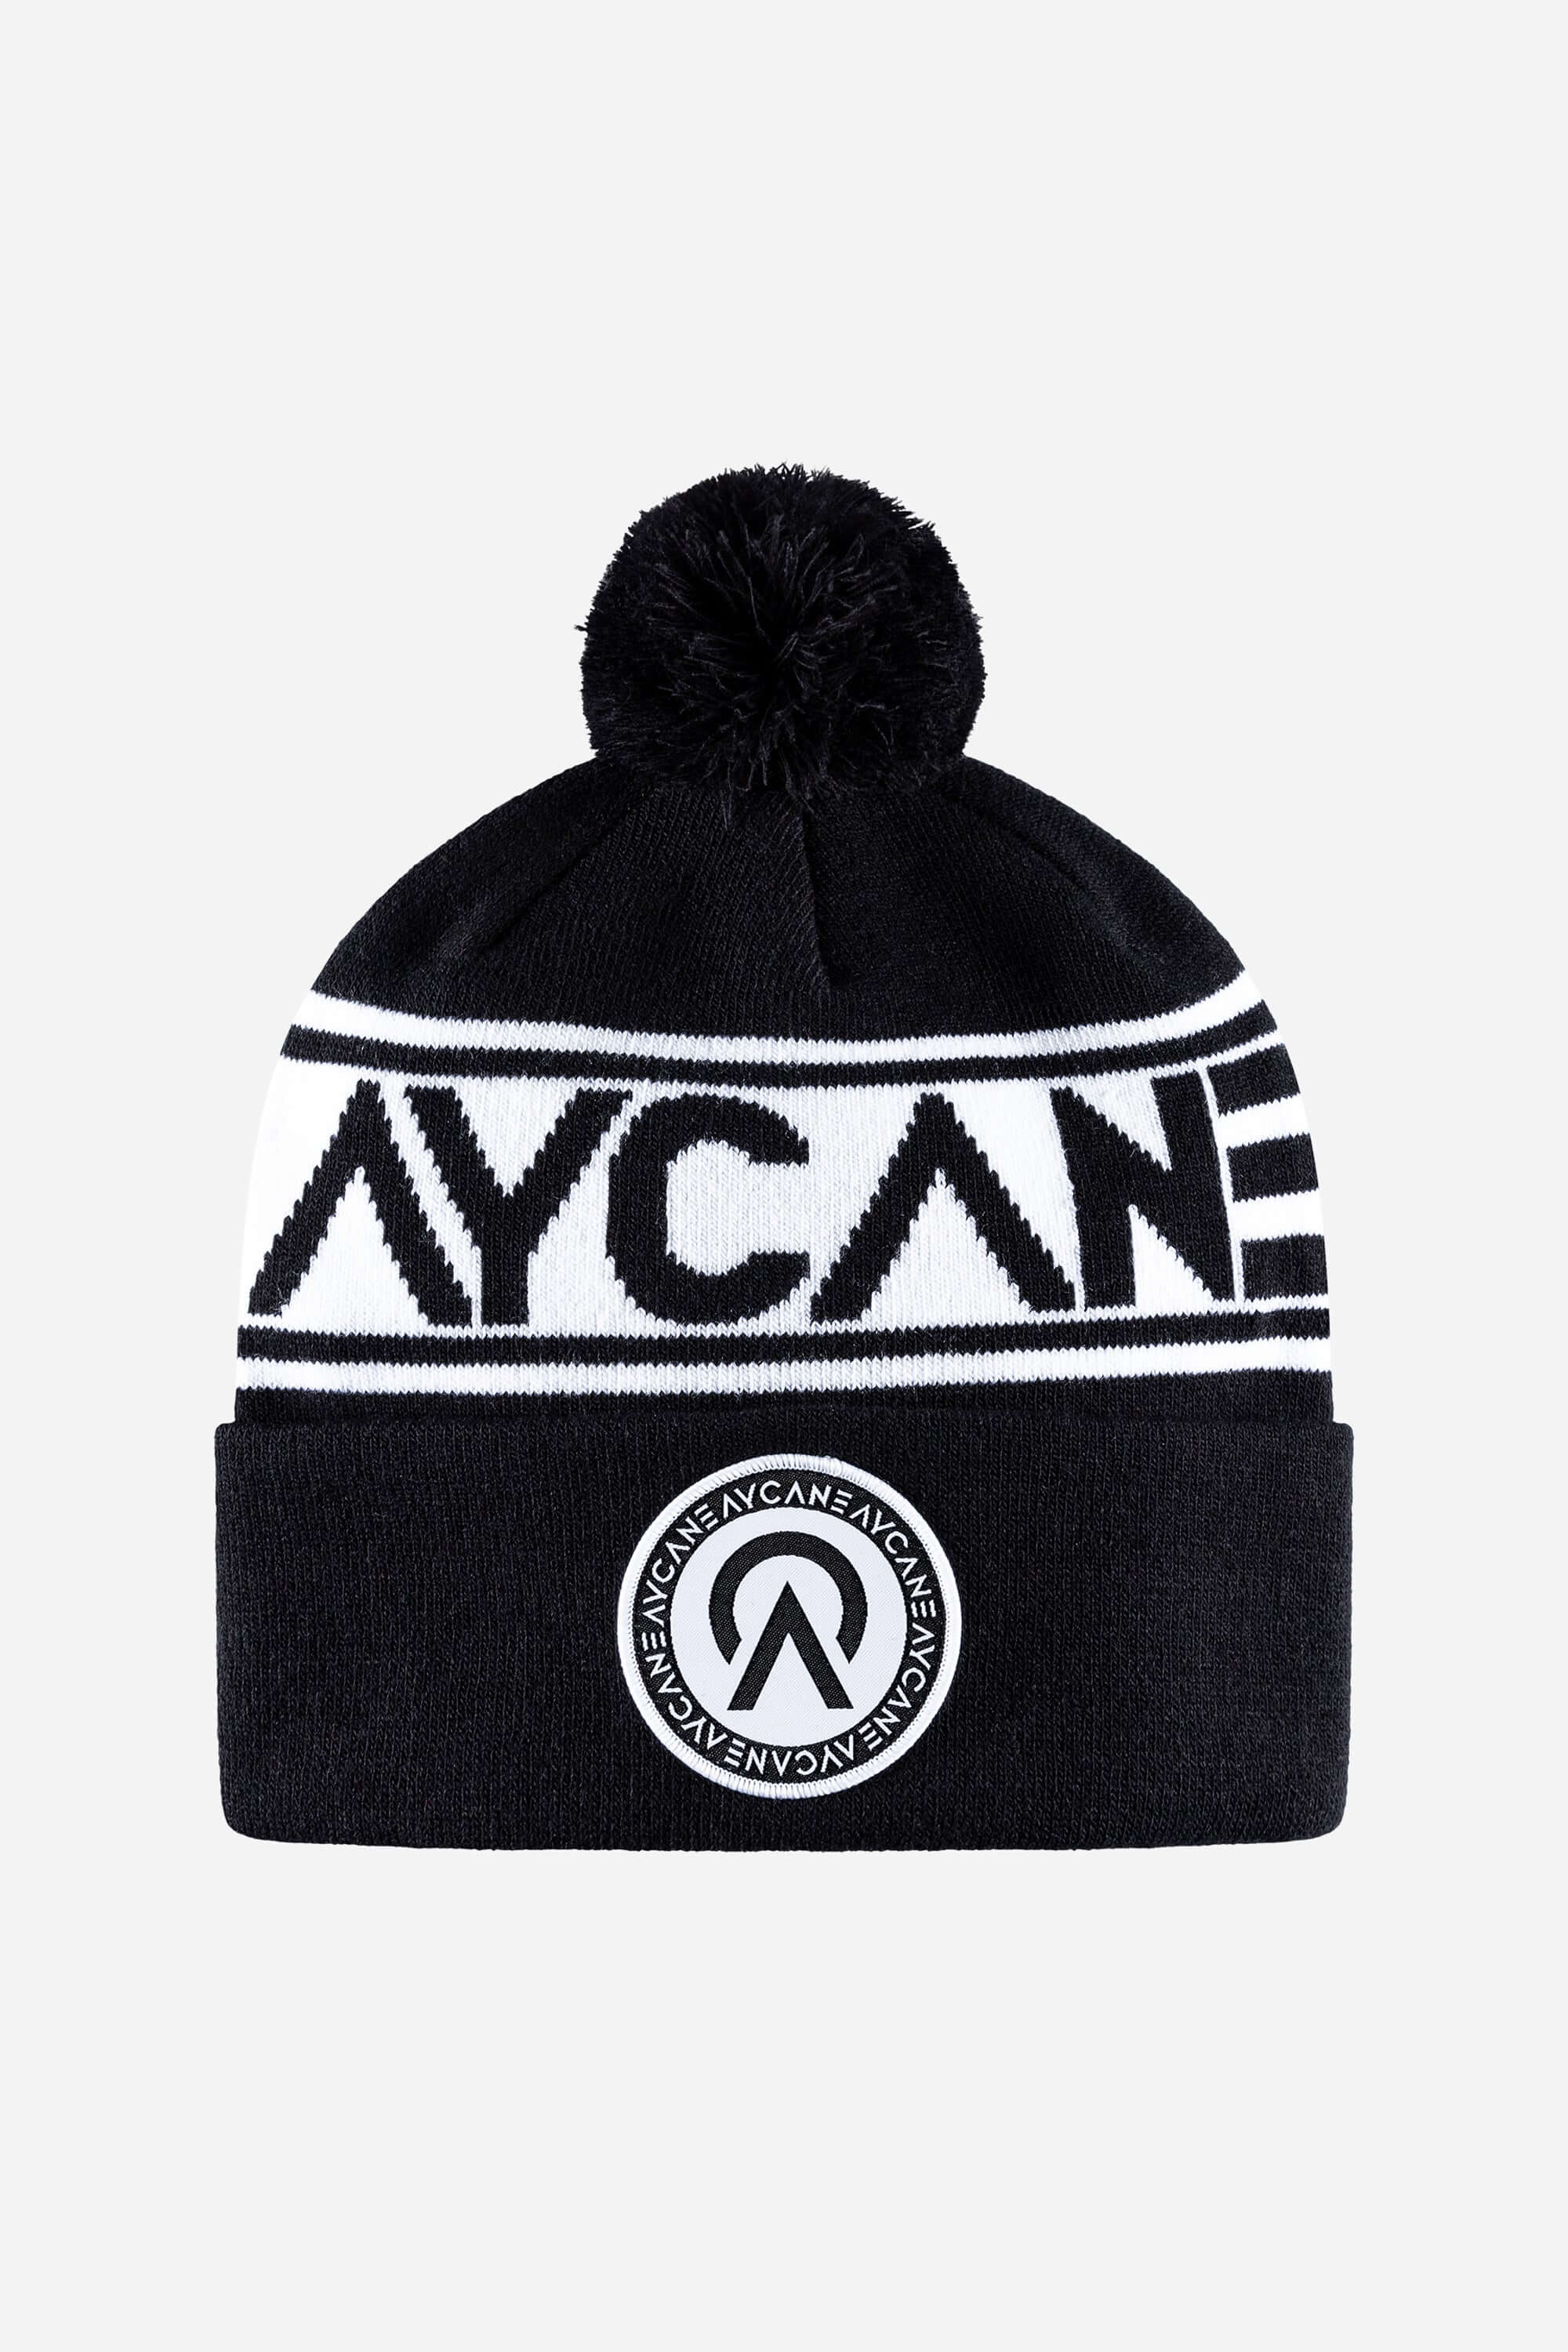 Hockey toque with pom in black and white